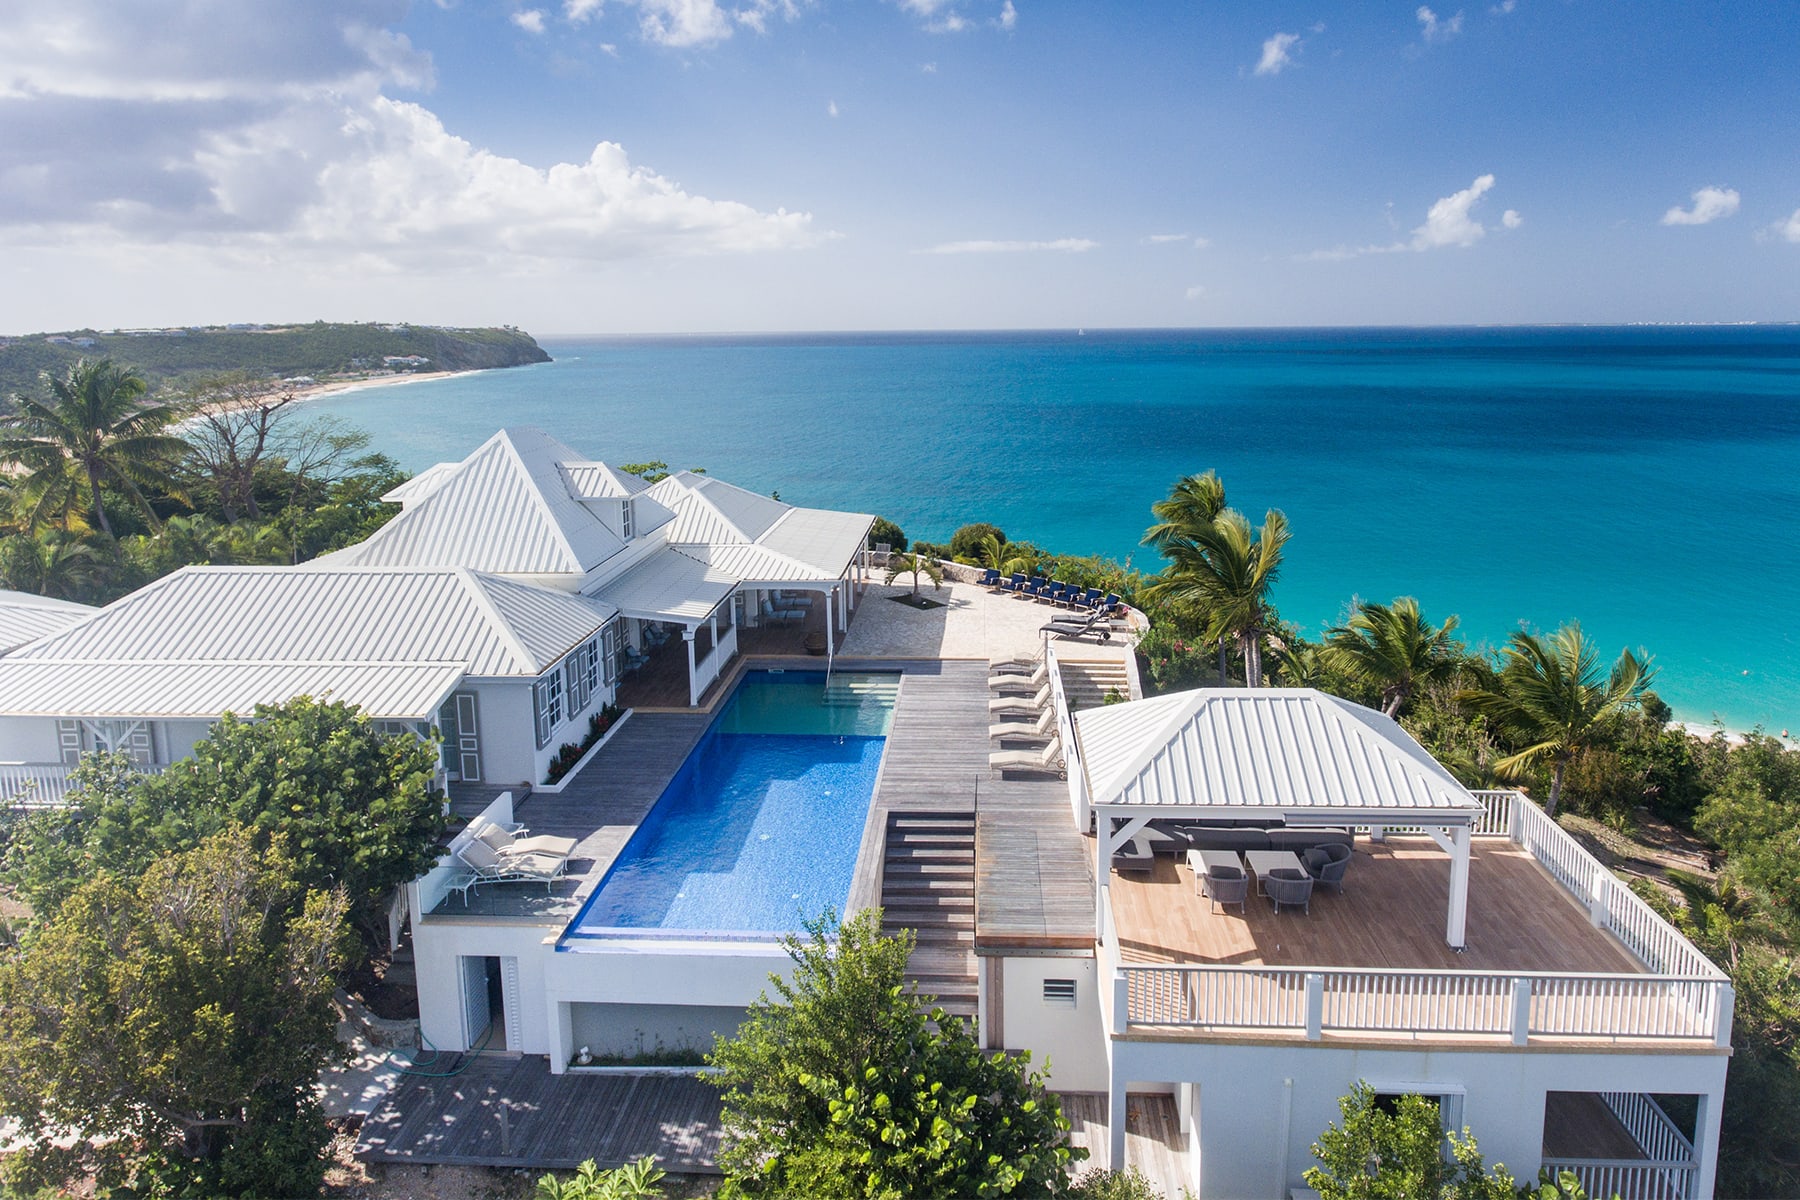 Property Image 1 - Le Caprice 270 degree views + access to the beach